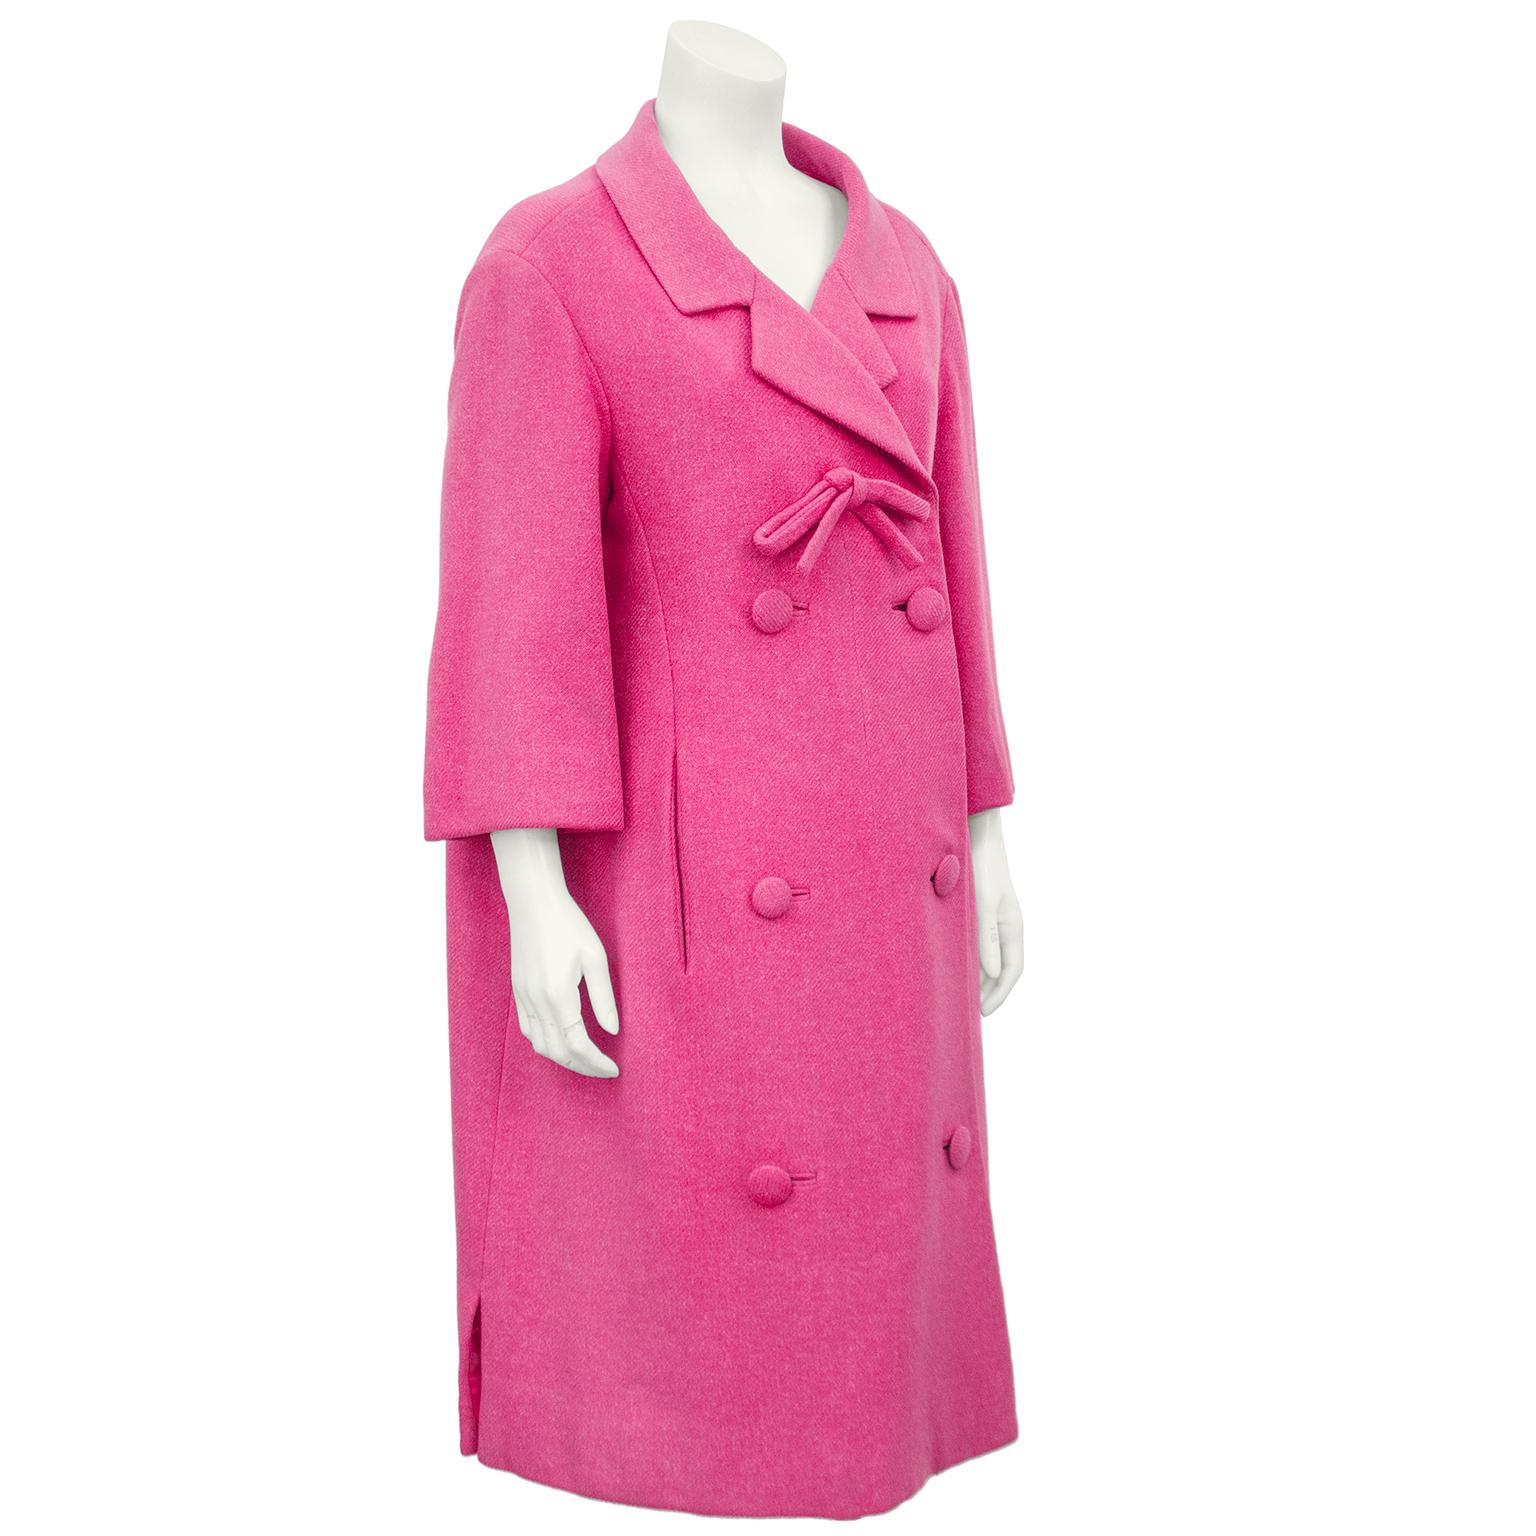 Beautiful numbered 1959 Spring collection coral pink wool coat from the house of Christian Dior designed after his passing by Yves Saint Laurent. The coat has a wide notched lapel with a bow and double breasted buttons down the front. Hidden hooks